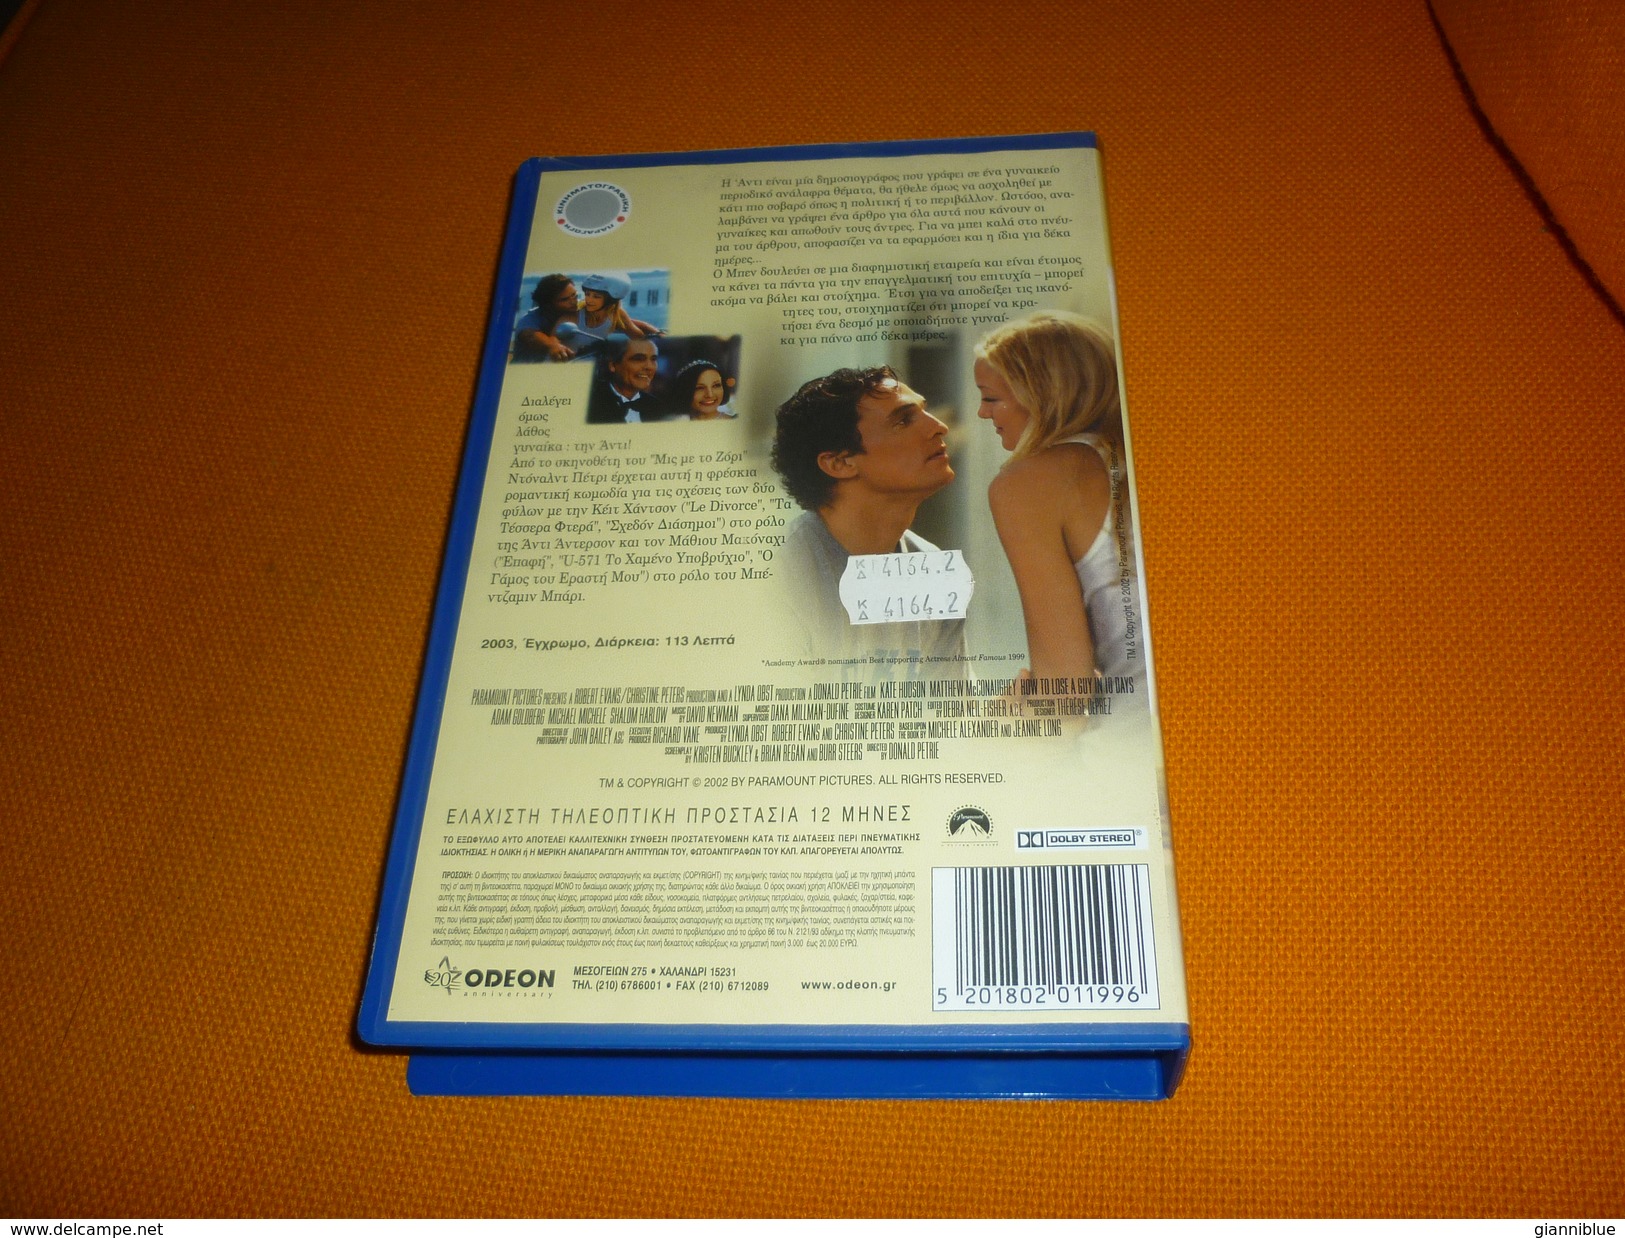 How To Lose A Guy In 10 Days Old Greek Vhs Cassette Tape From Greece - Lovestorys